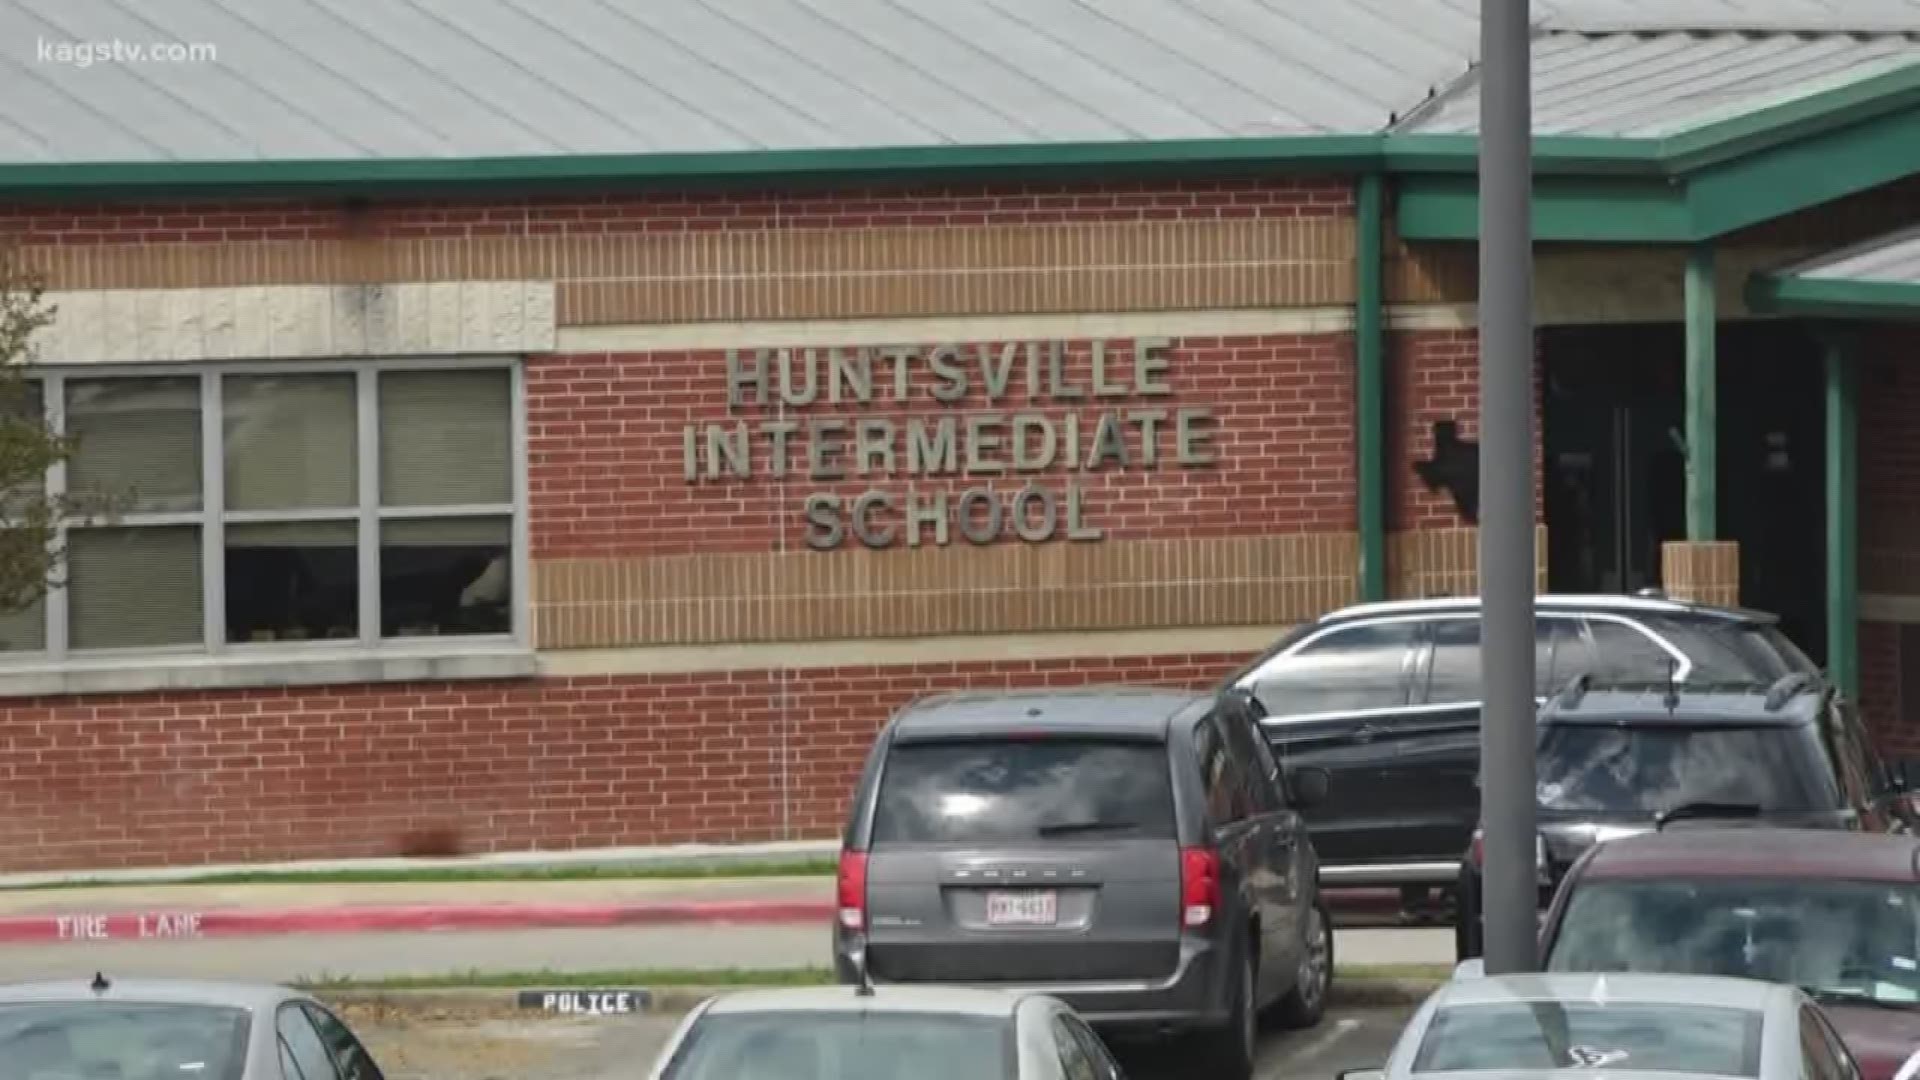 A two car accident on Friday night in Bastrop County took the lives of at least four people, leaving only one survivor, all of whom are connected to Huntsville ISD.